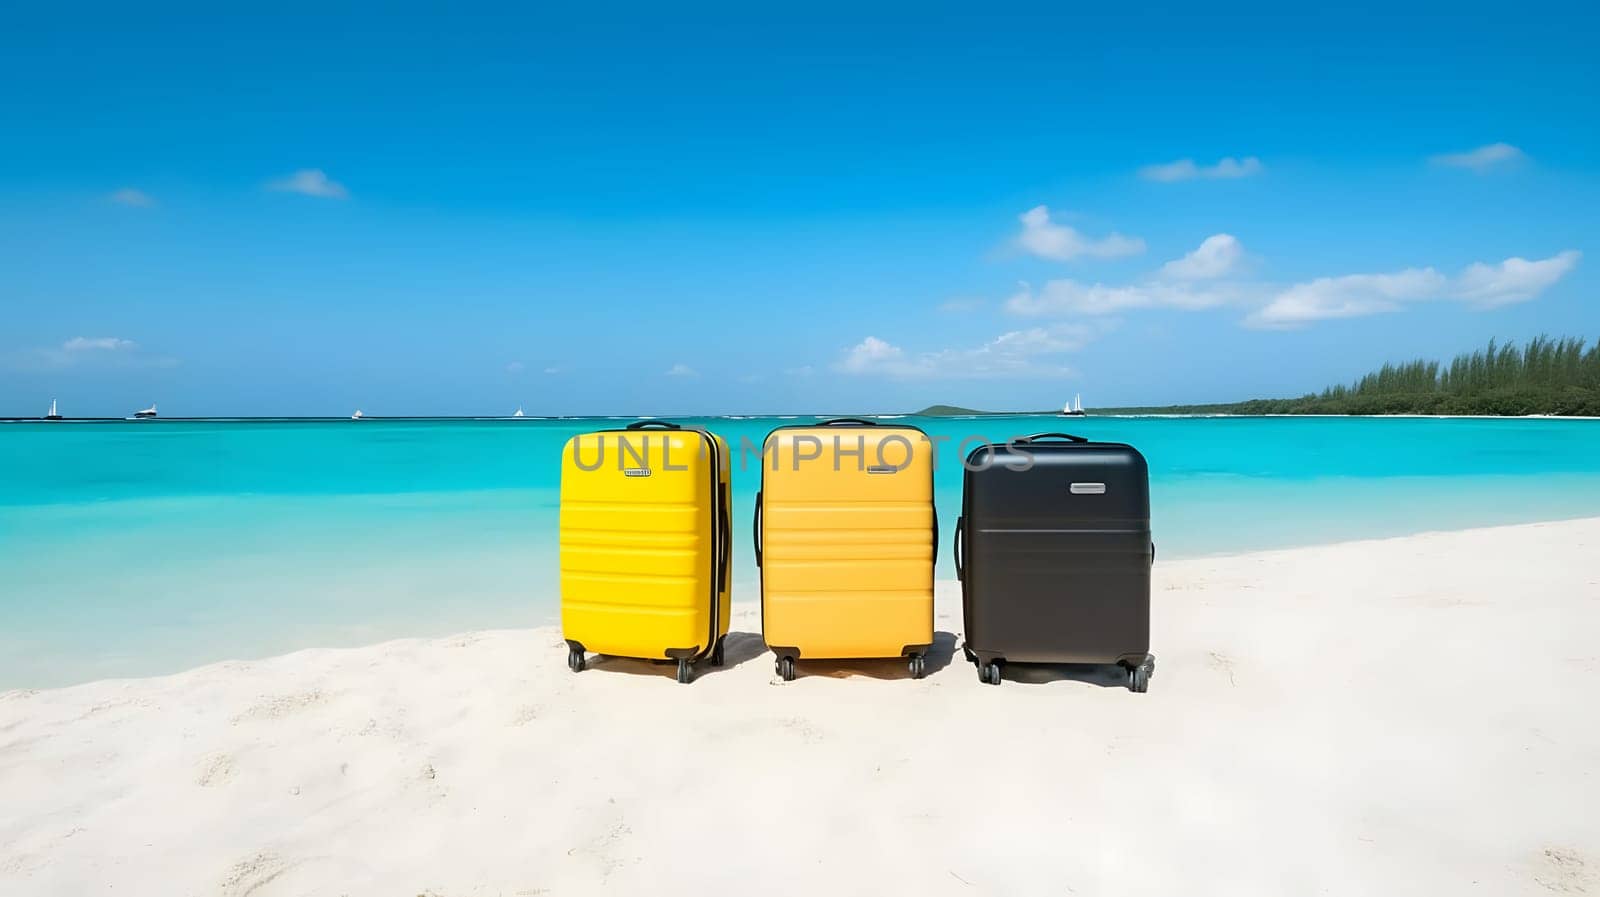 Few modern suitcases on tropical resort beach at sunny day. Neural network generated in May 2023. Not based on any actual person, scene or pattern.